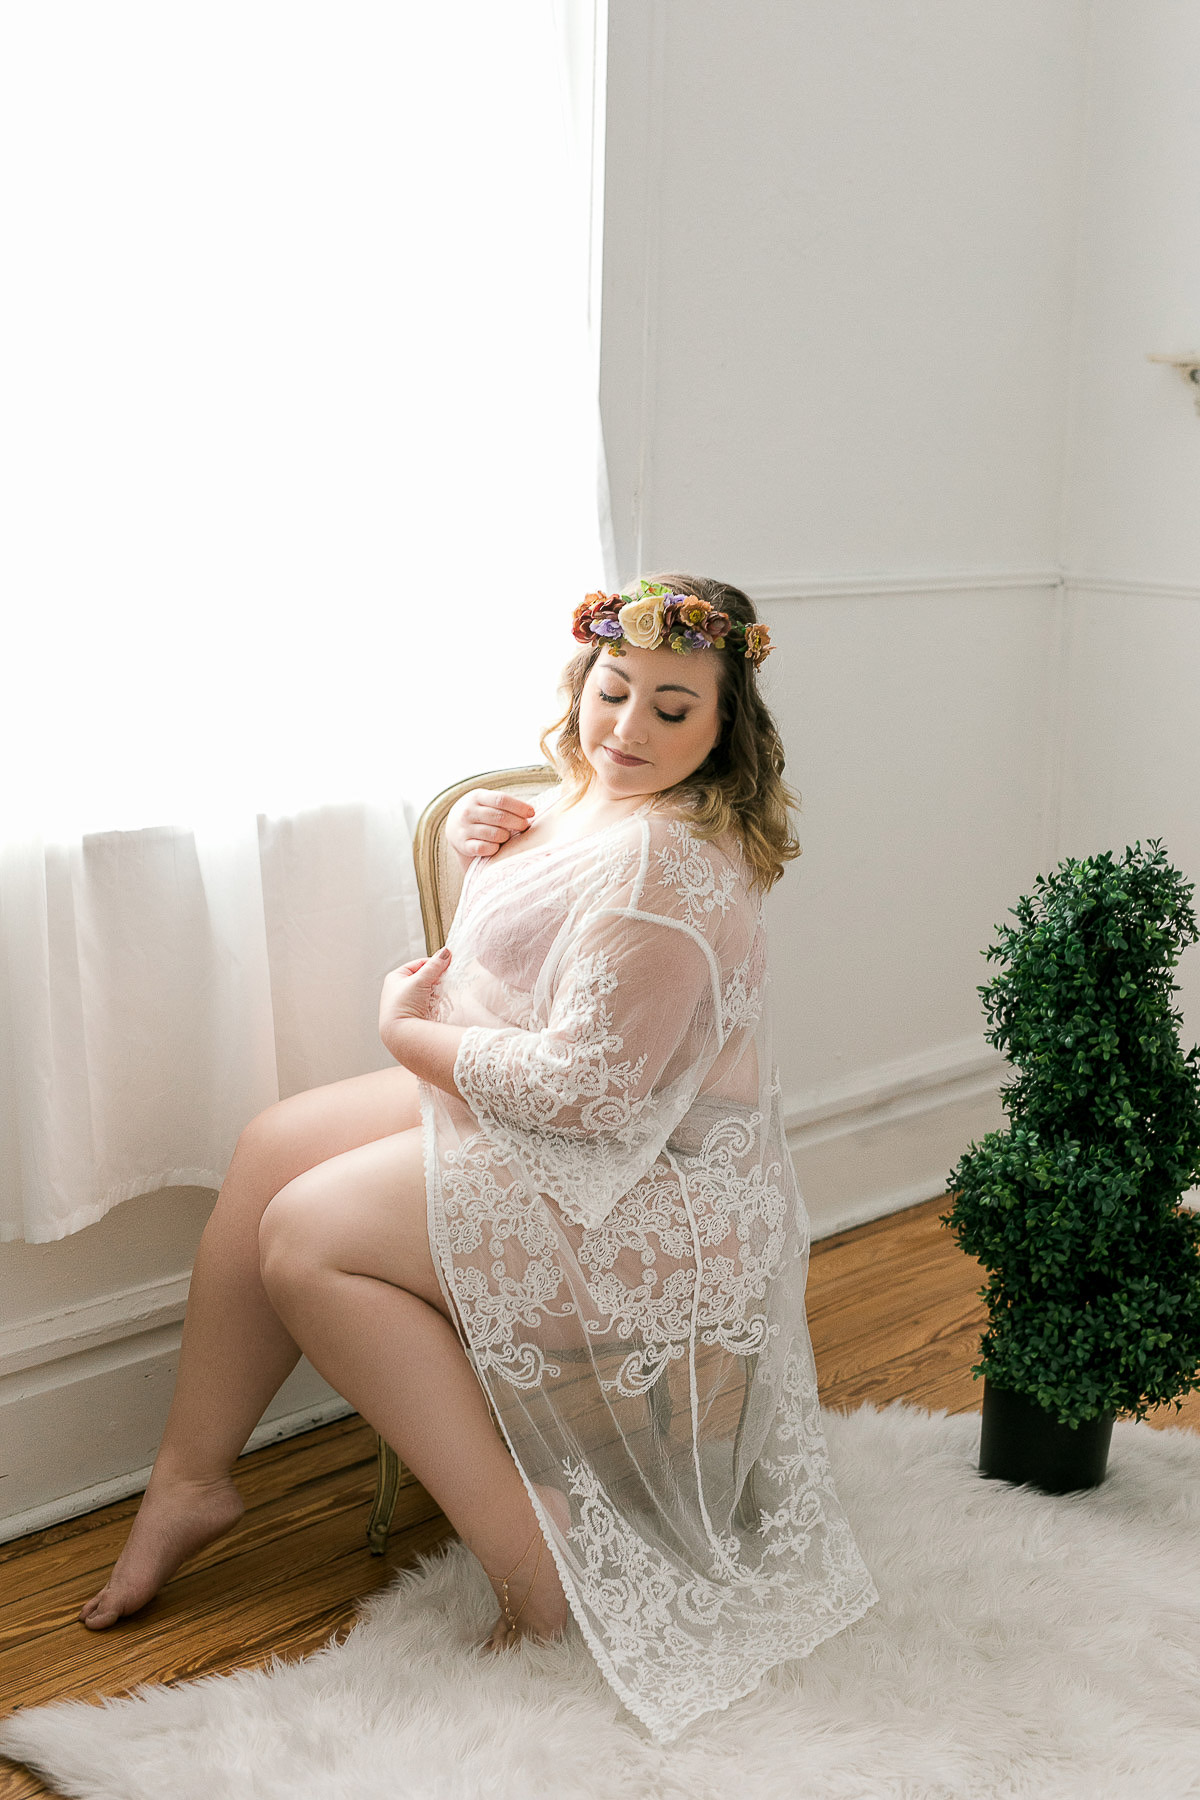 Curvy woman in boudoir shoot sitting in front of the window looking at her lace robe.